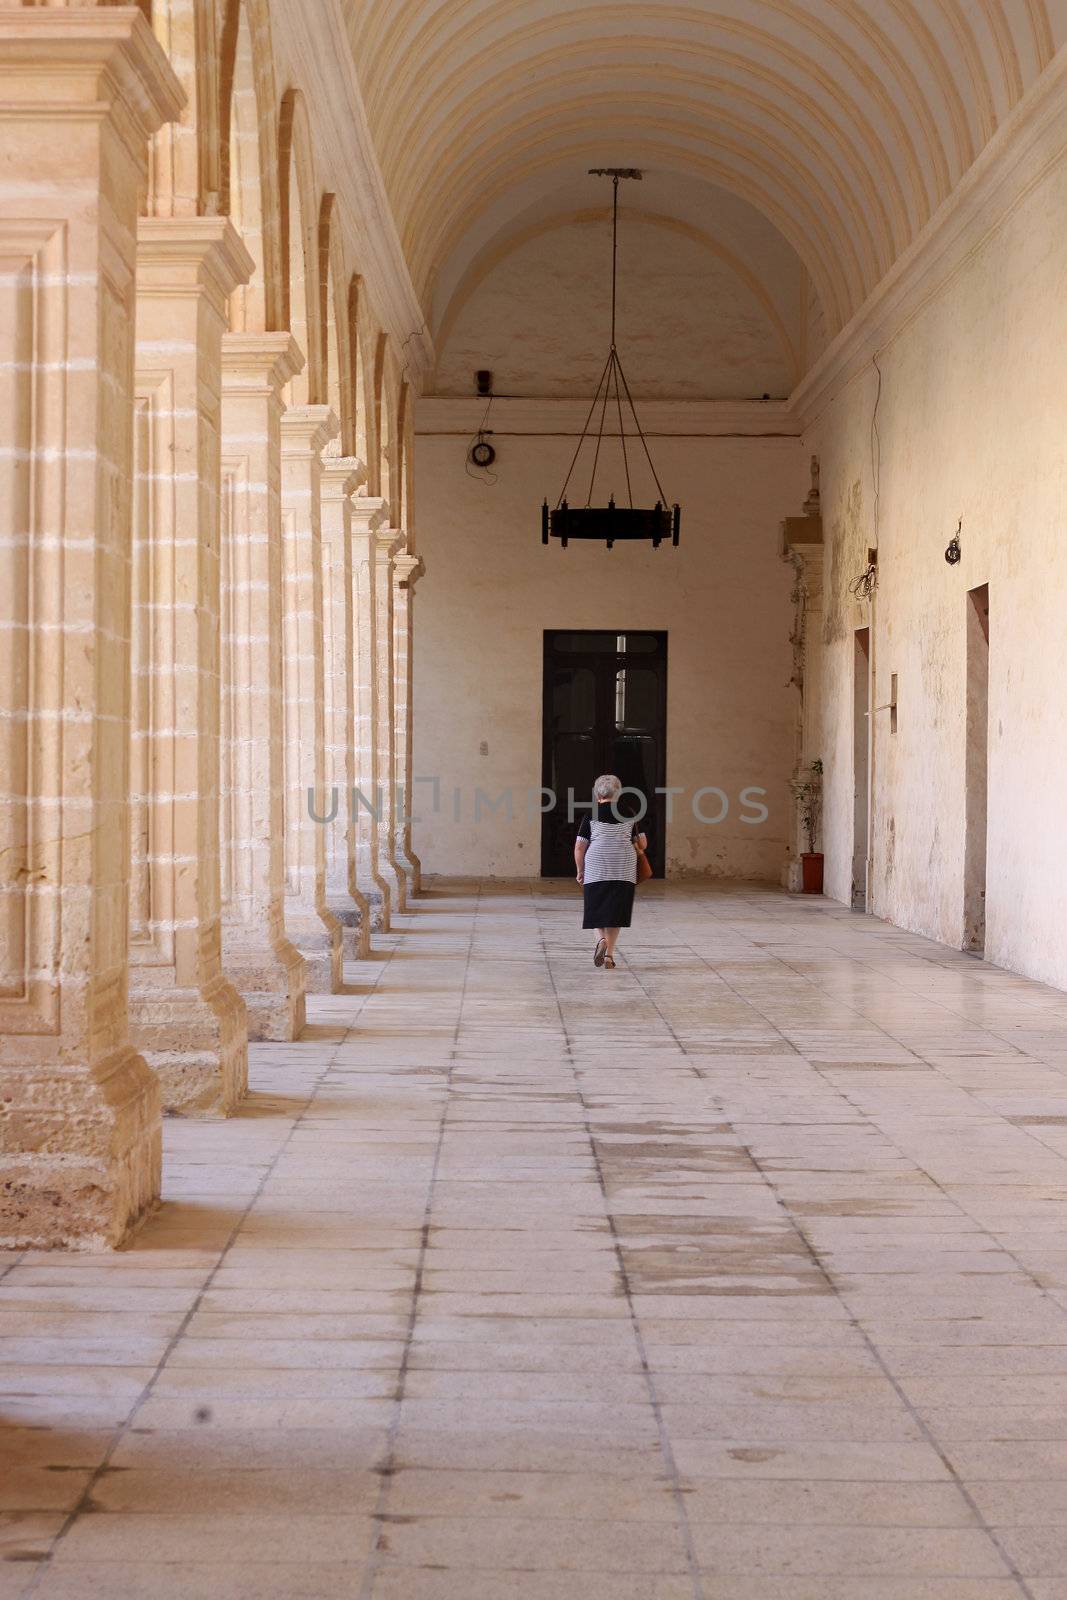 An old lady is walking through an old convent passage